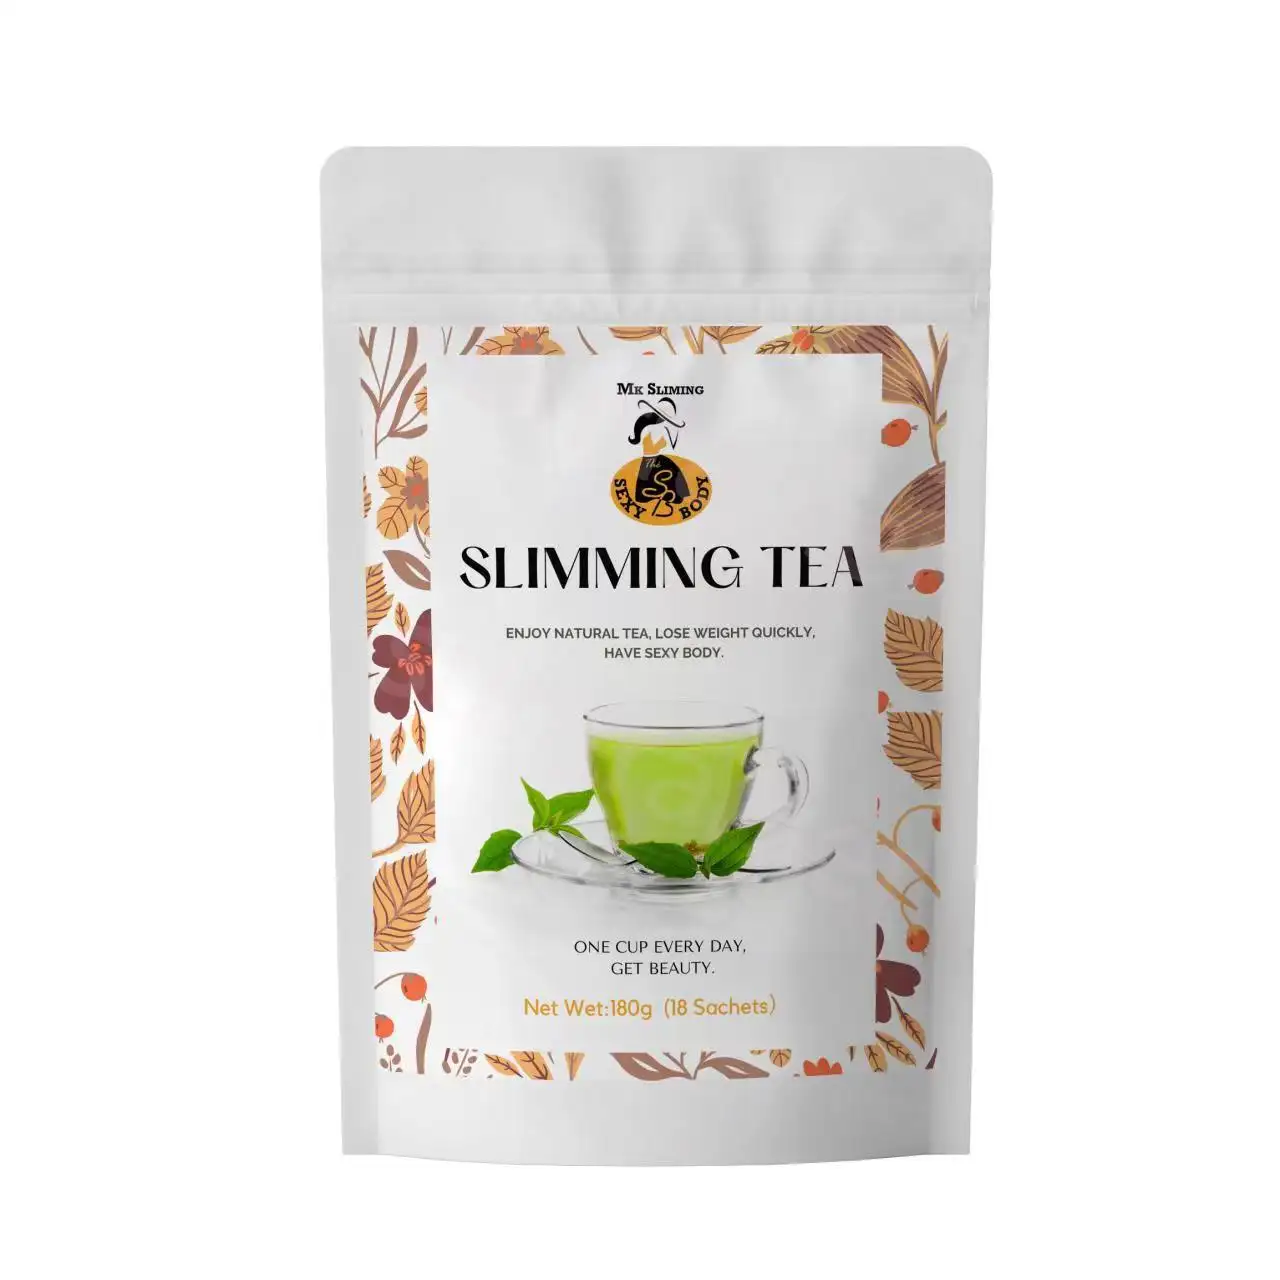 Best Selling 14/28 Day Detox Slim Flat Tummy Tea bags Private Label organic slimming weight Loss fit Tea bags